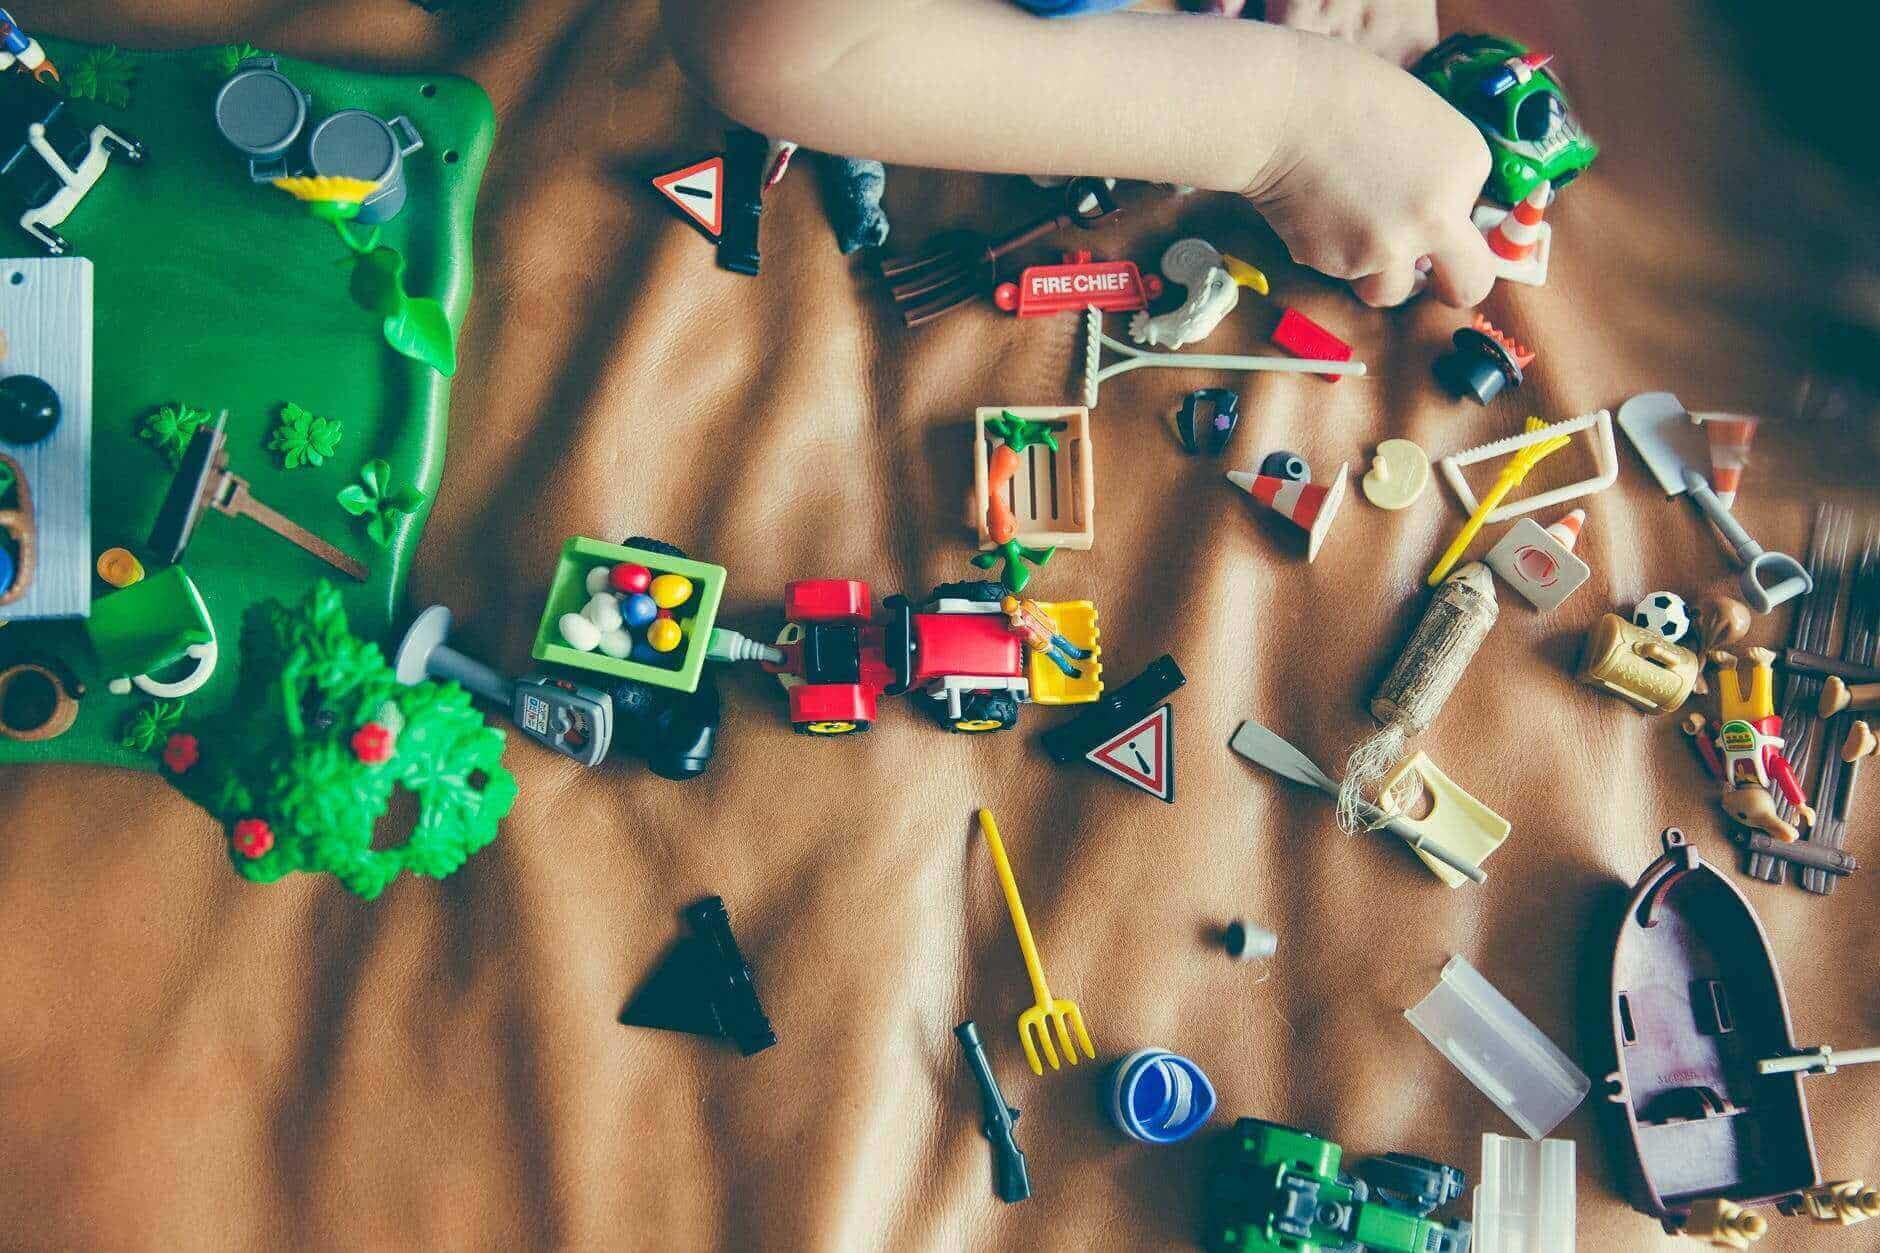  toys for your children’s growth